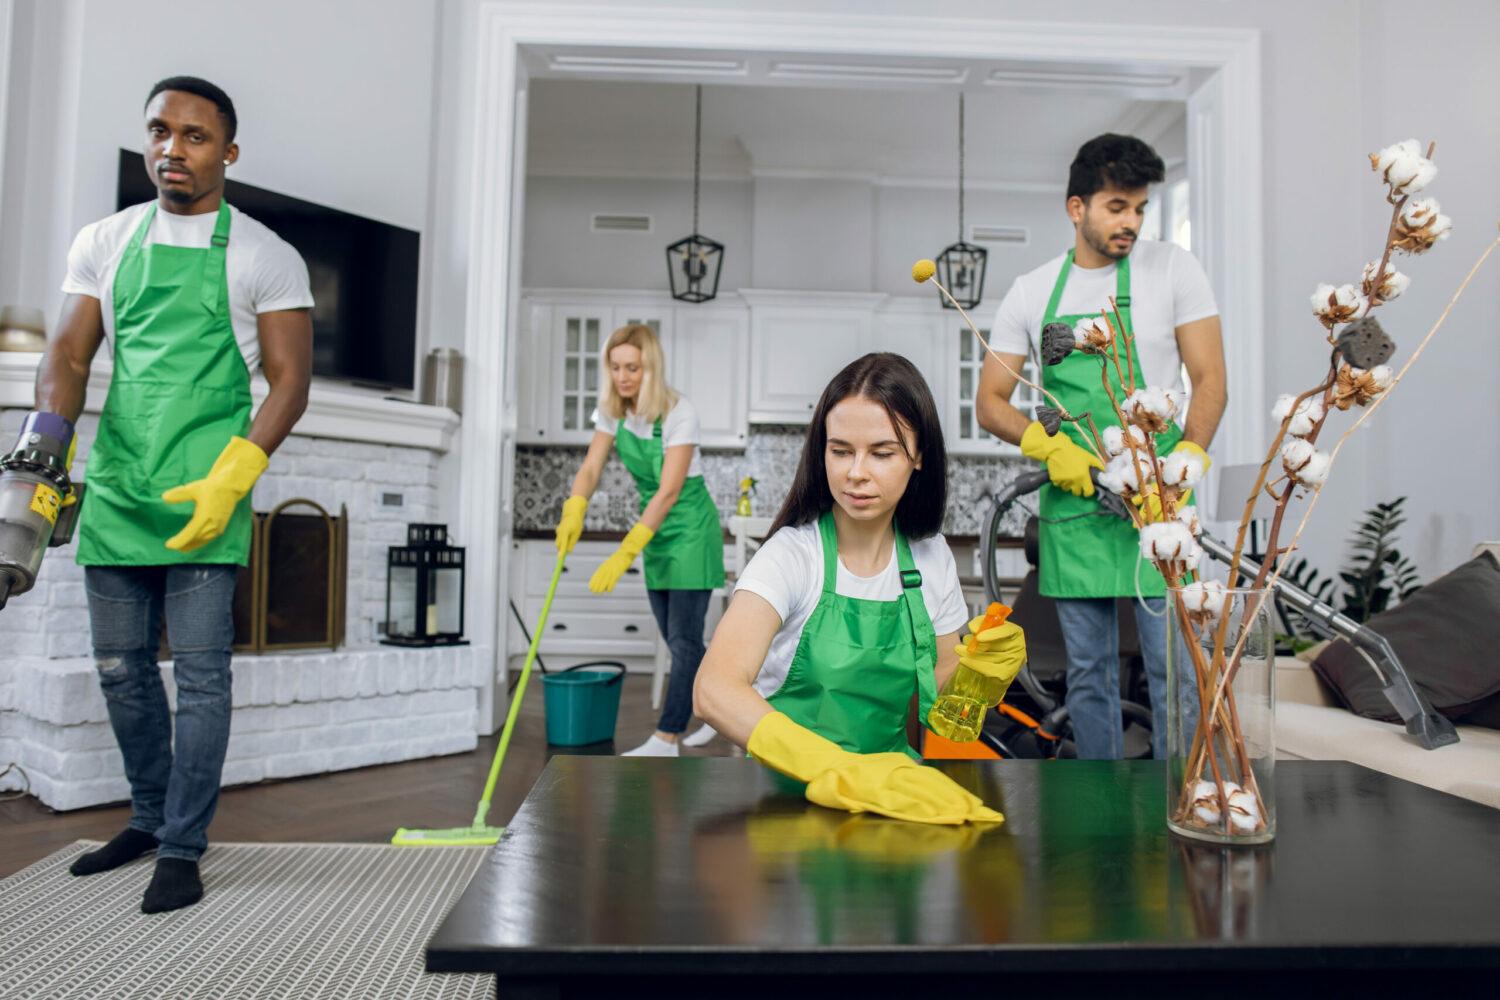 professional end of tenancy cleaning services